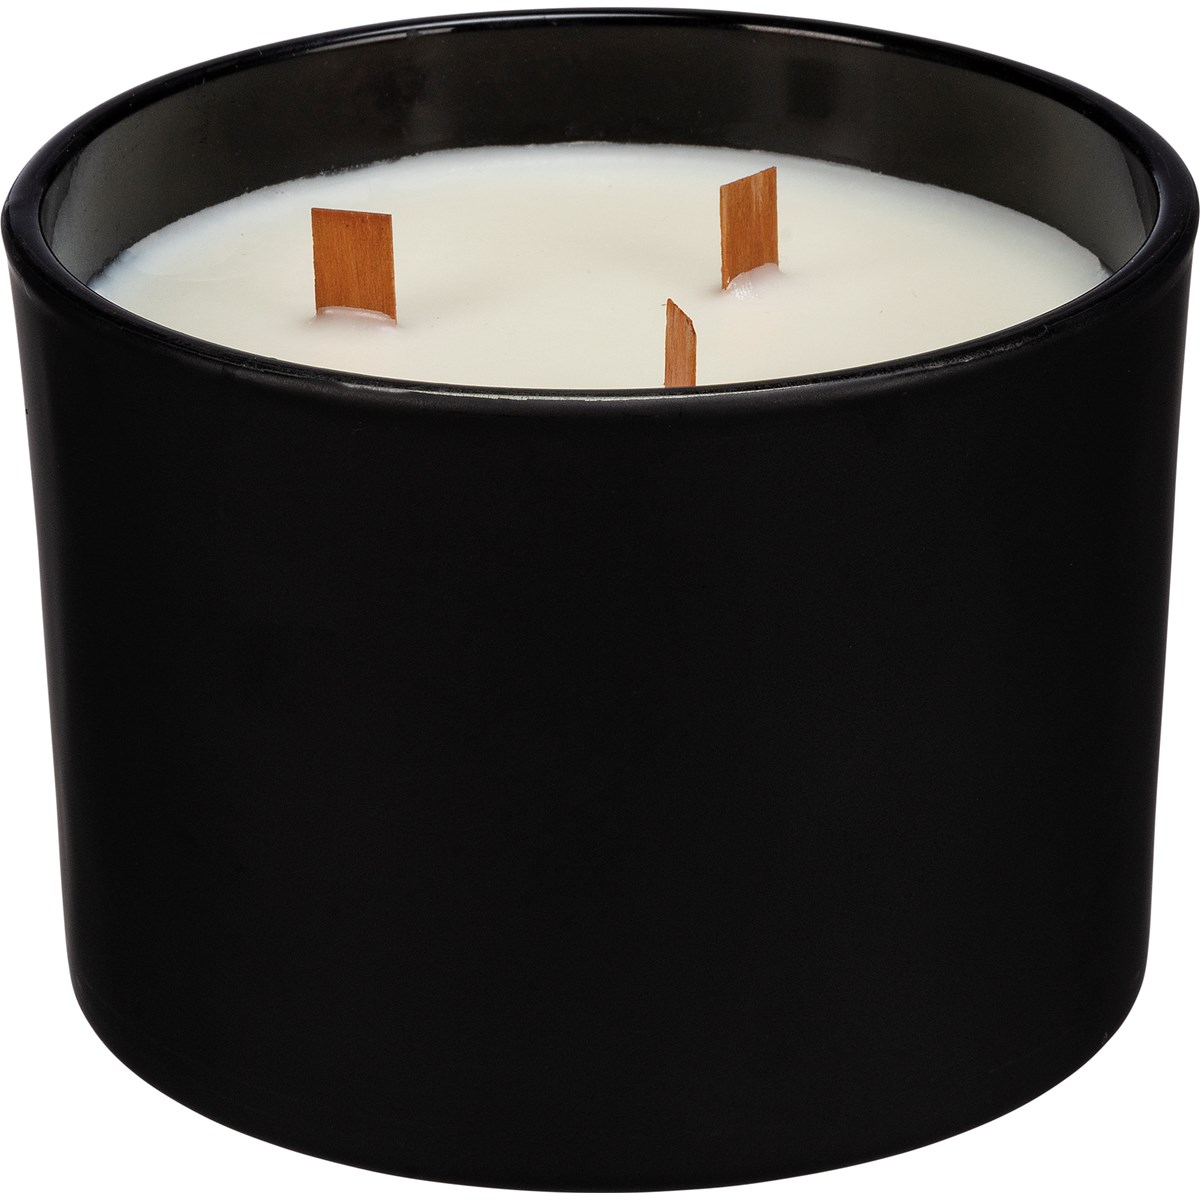 Mother Jar Candle - Soy Wax, Glass, Wood